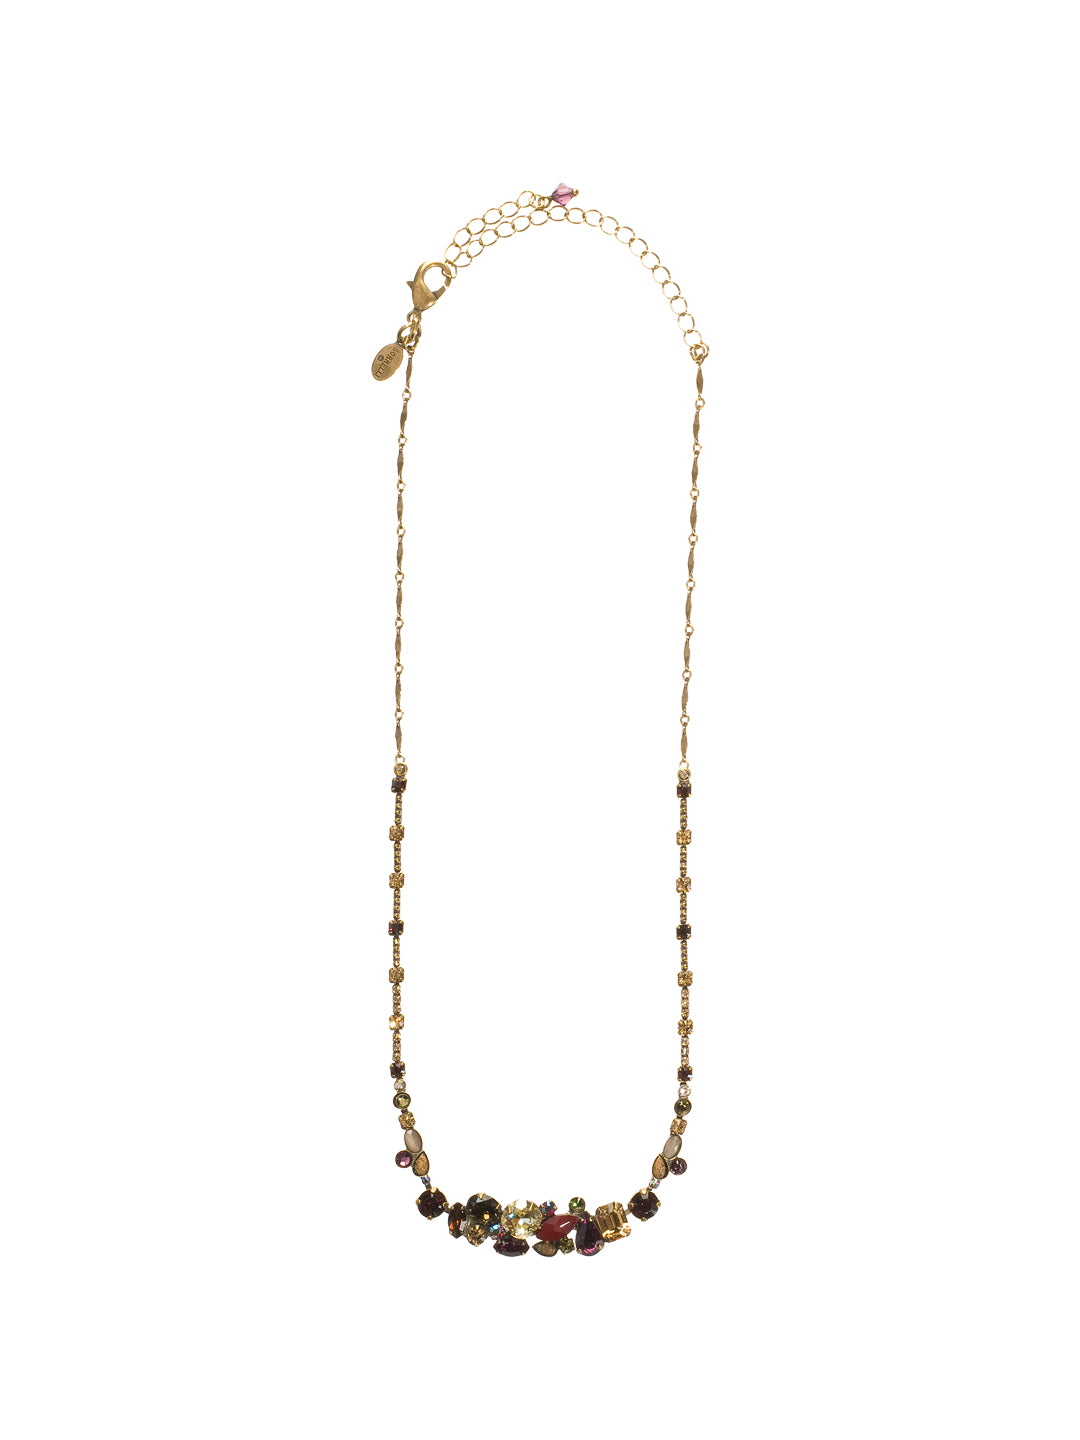 Simply Elegant Crystal Cluster Necklace Tennis Necklace - NCF26AGTAP